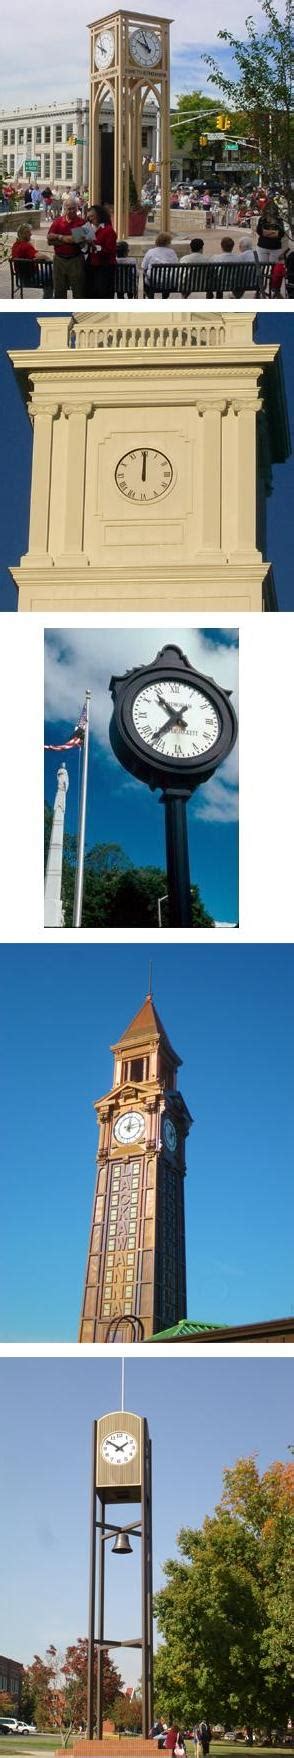 Clocks And Clock Towers Campbellsville Industries Inc Sweets